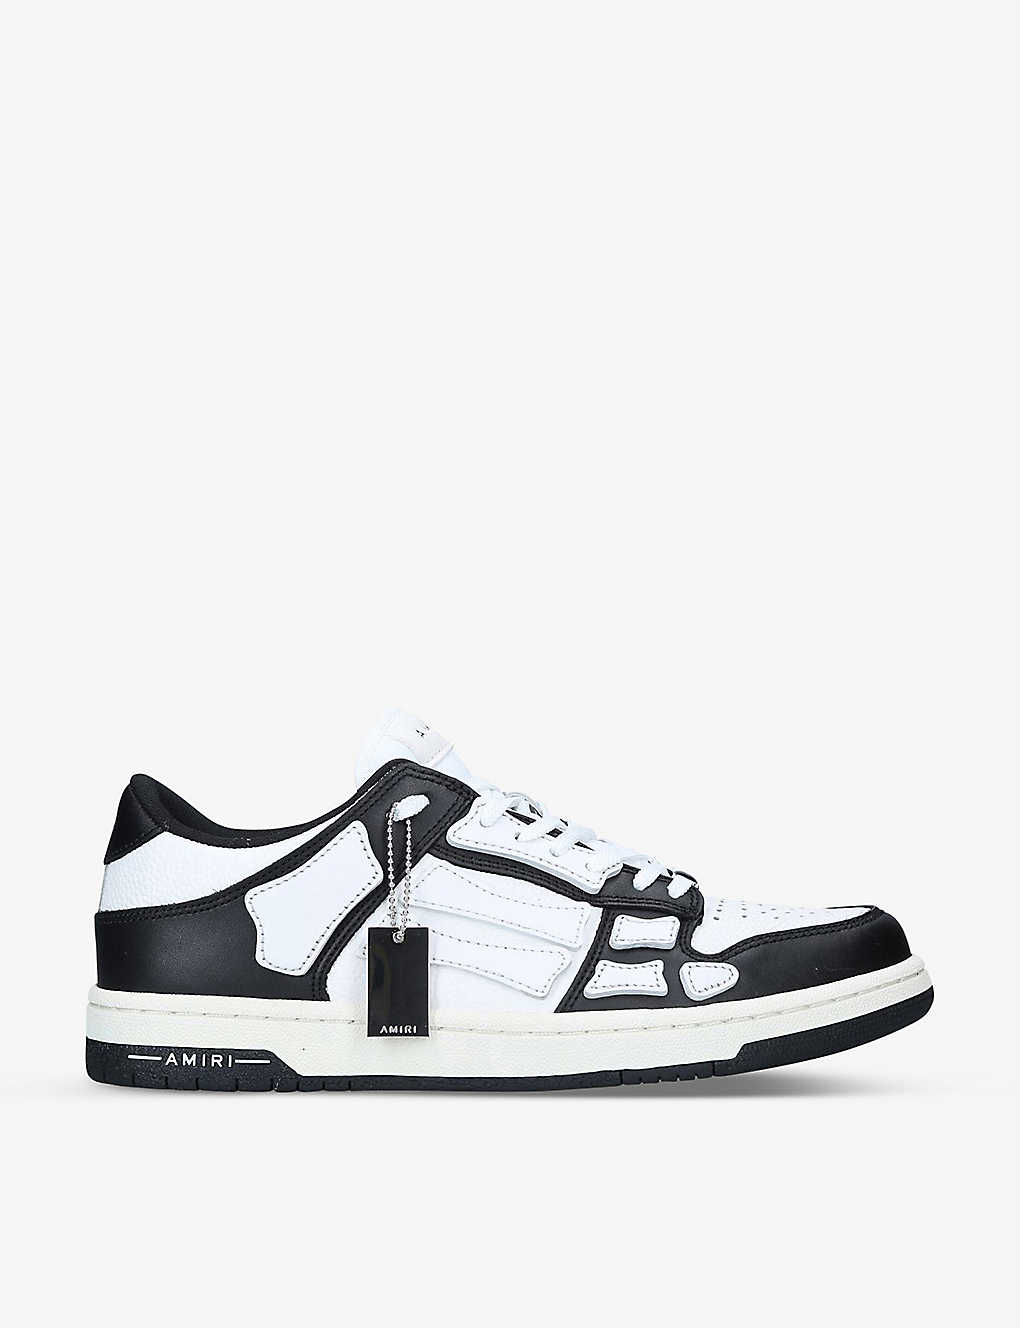 Shop Amiri Mens Blk/white Skel Panelled Leather Low-top Trainers